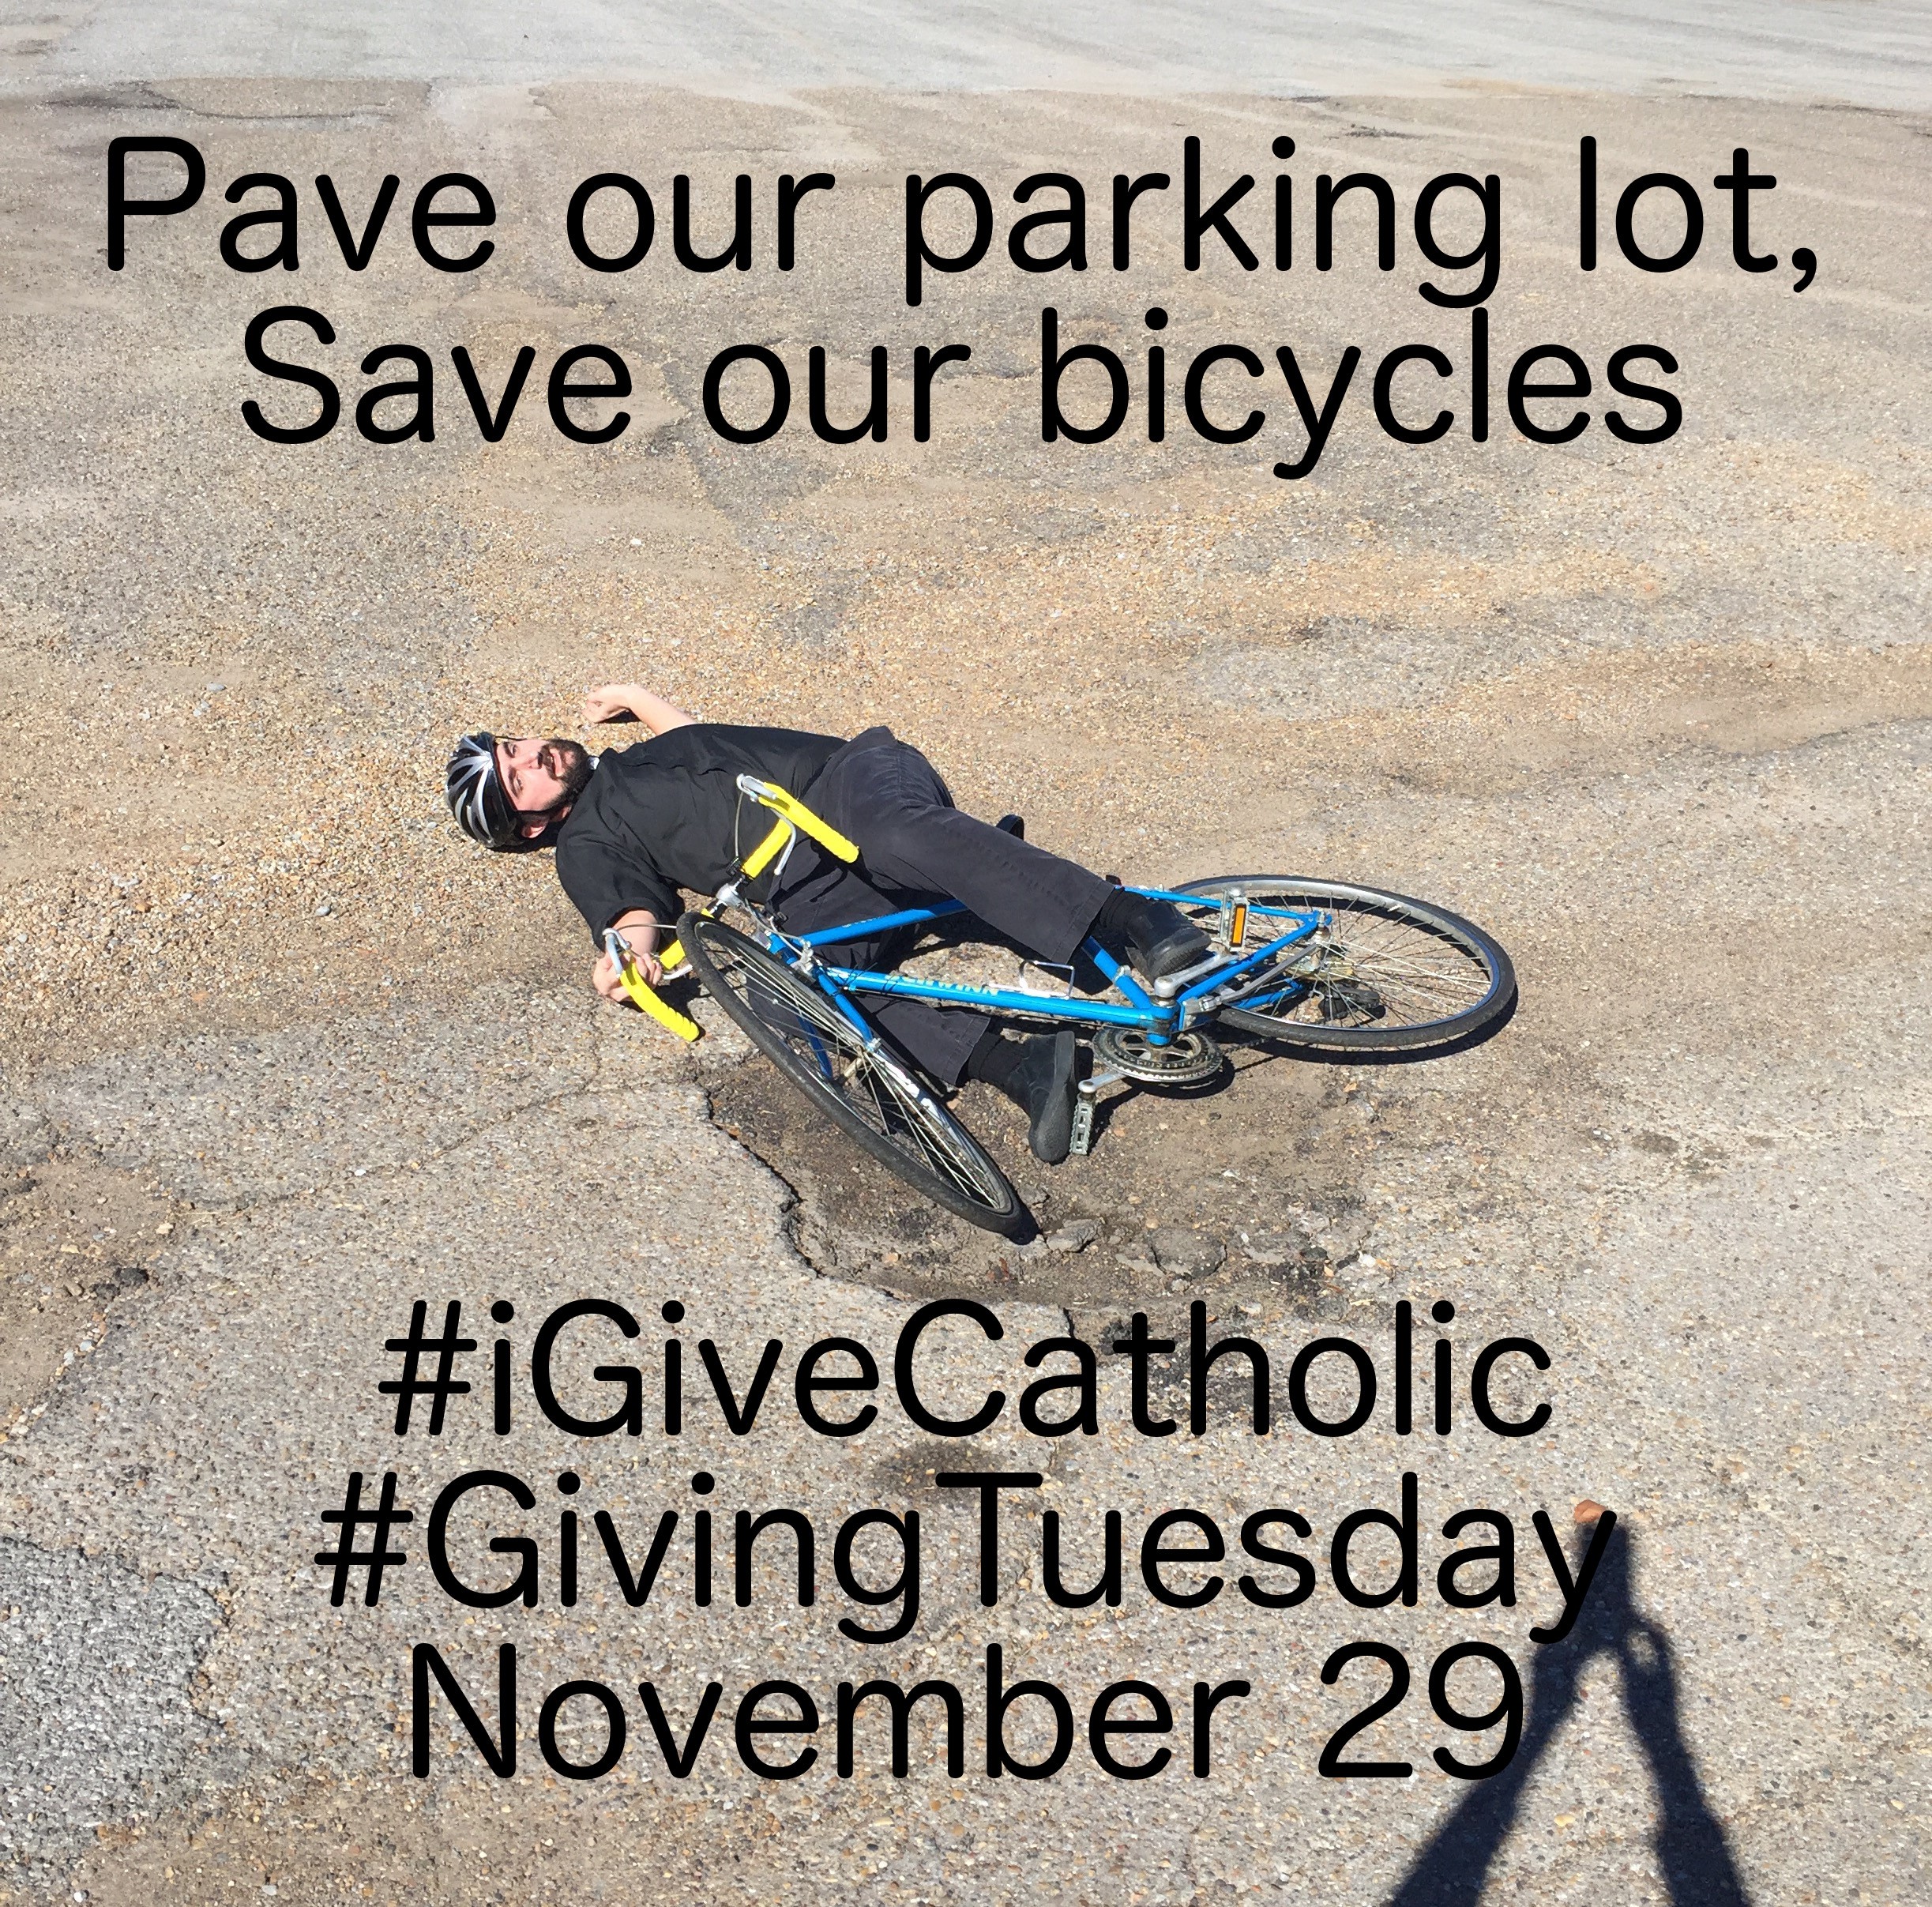 Father Scott Thomas, pastor of Clarksdale St. Elizabeth, used humor to get more donations during the lead up to #iGiveCatholic. (Photo courtesy of Father Scott Thomas)